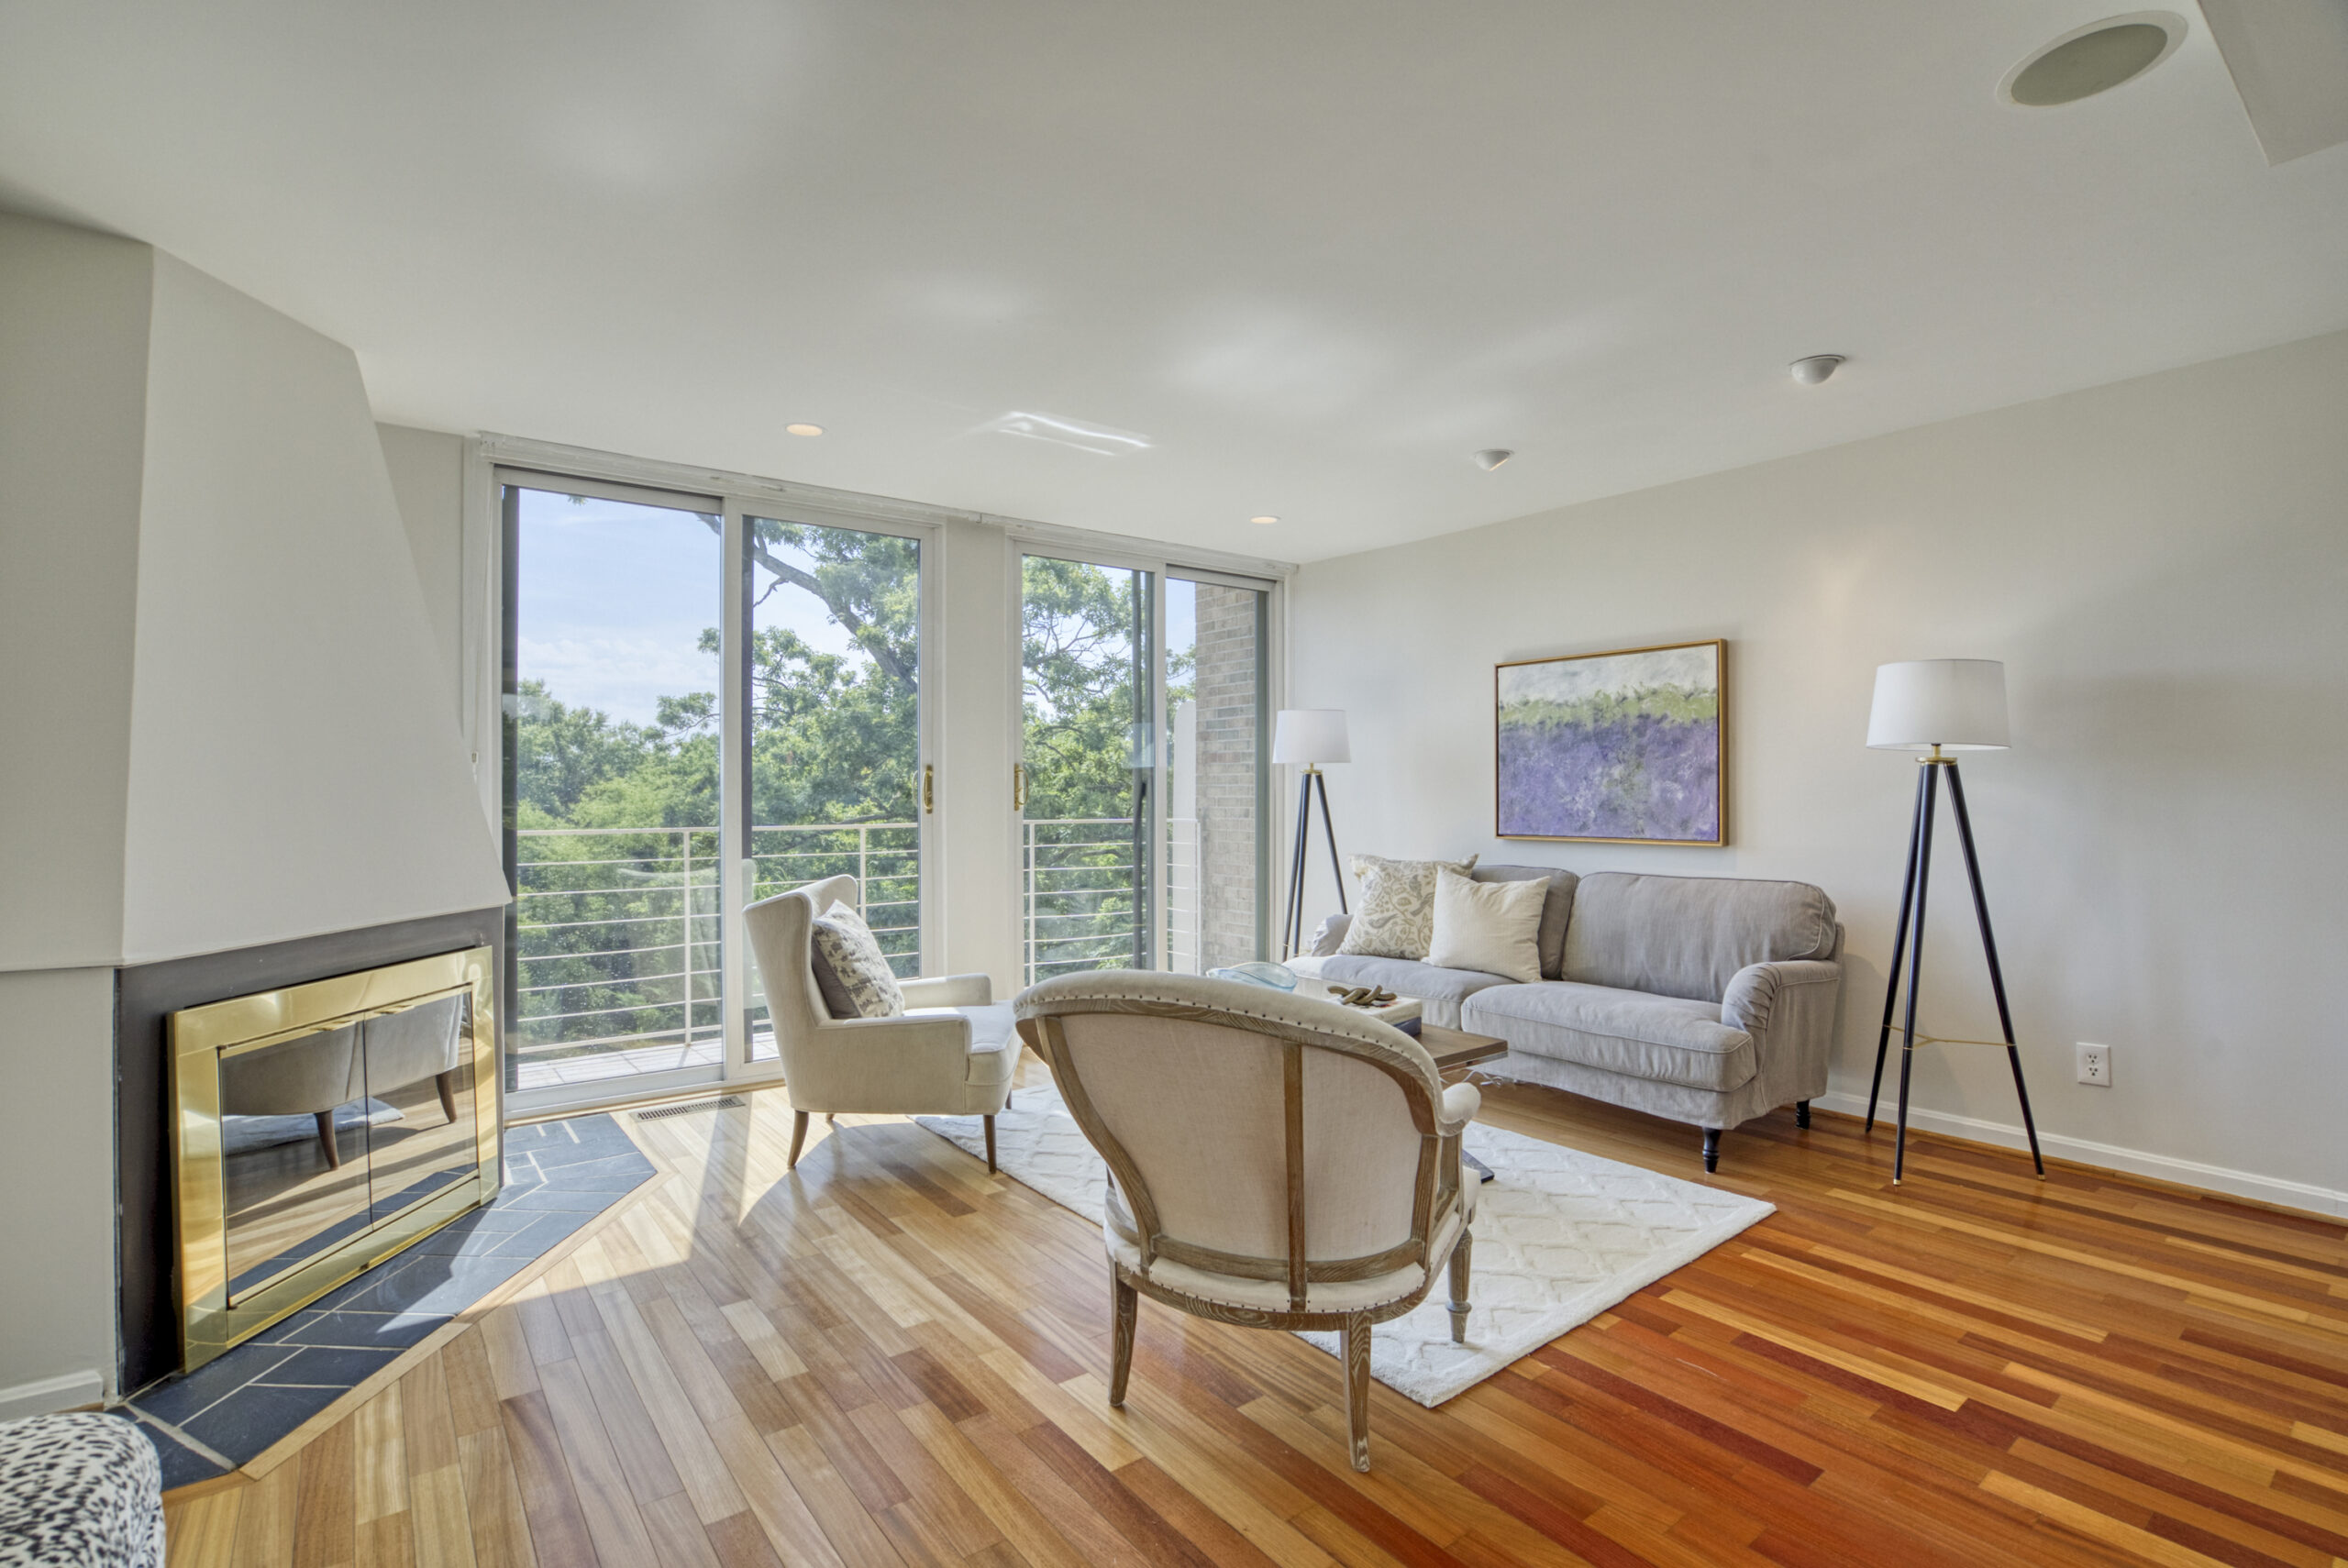 Professional interior photo of 1215 N Nash St #1, Arlington - showing the living room from the perspective of standing at the wet bar with hardwood floors, built-in fireplace and large glass balcony doors